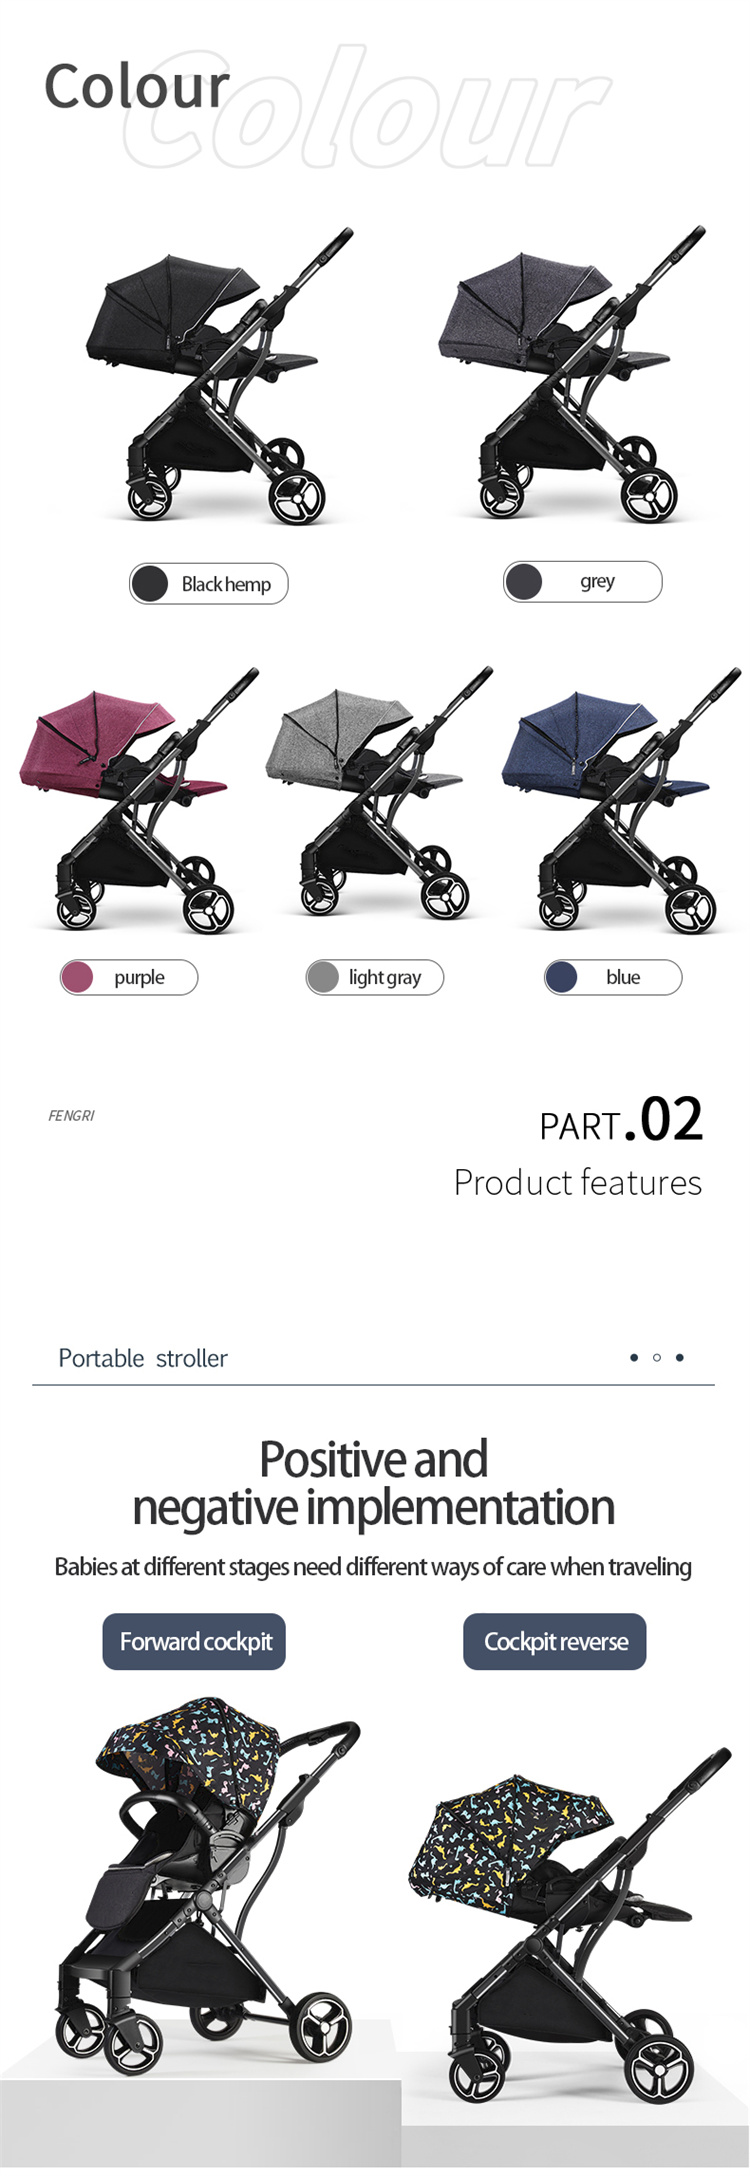 FENGRI Ultralight collapsible stroller